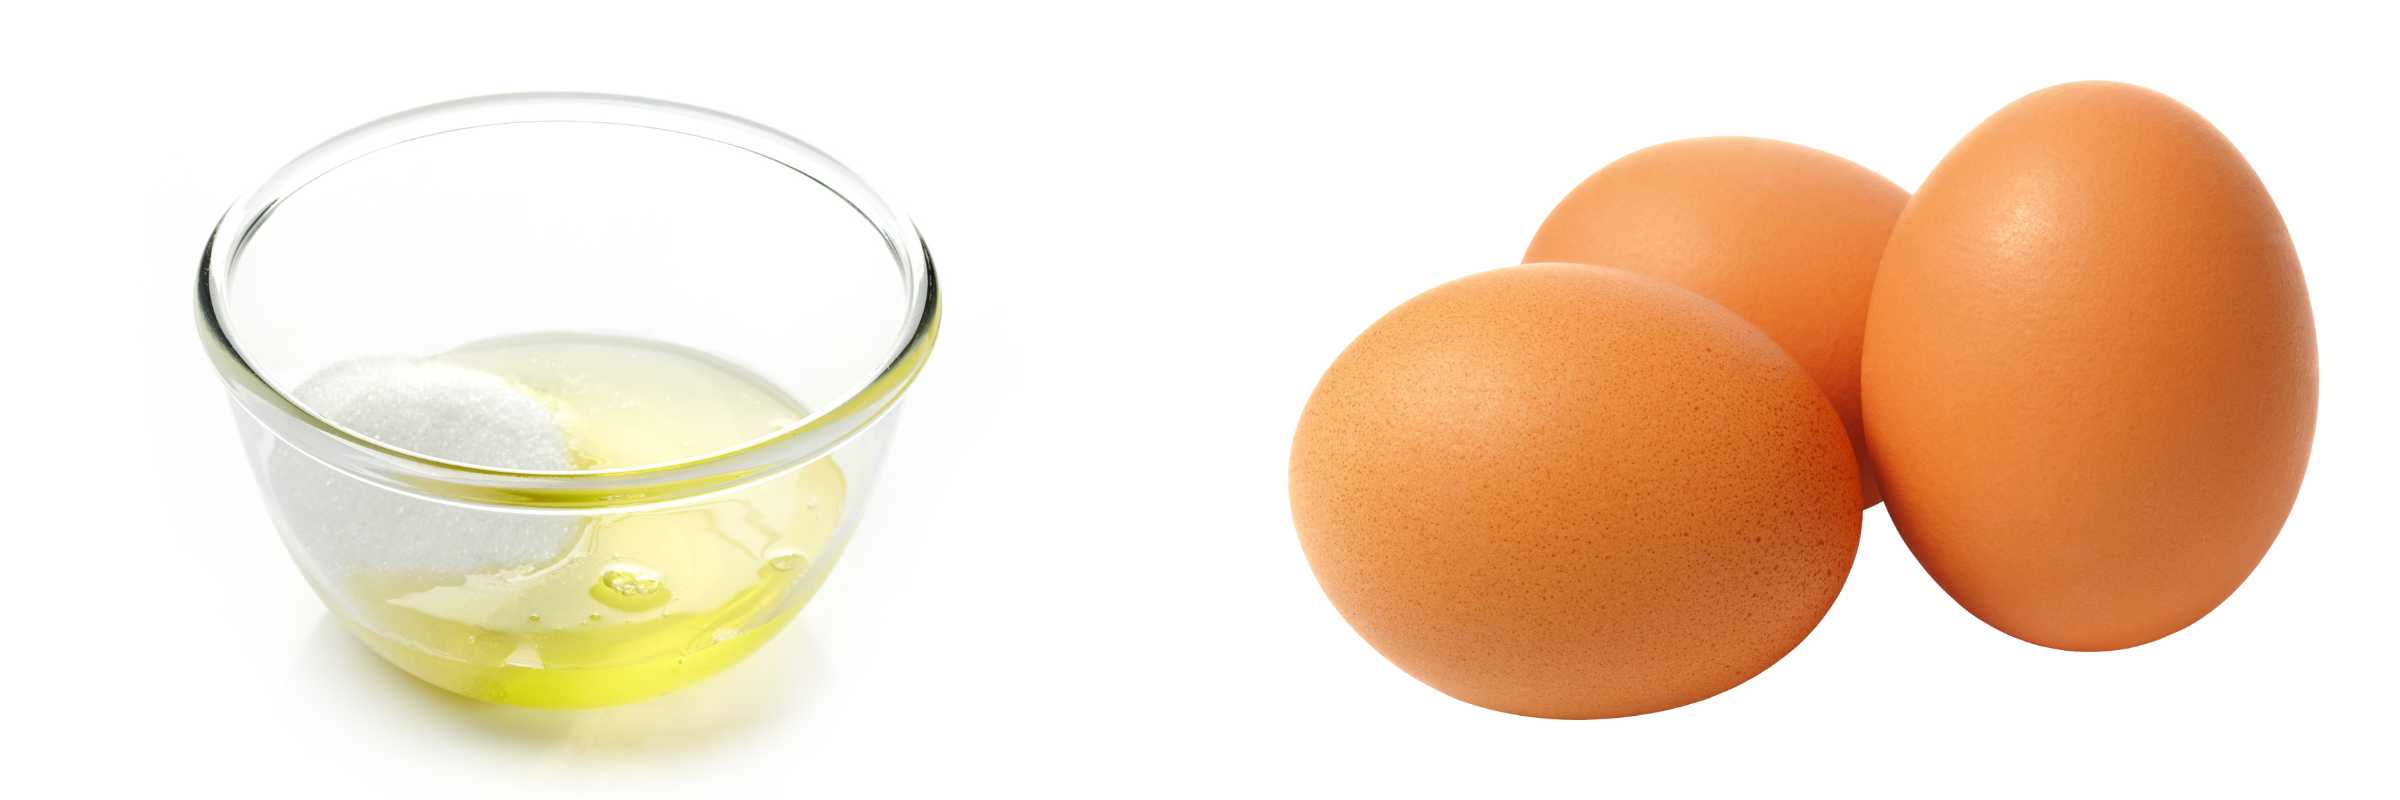 Prosecco Fining Process Ingredient - Eggs